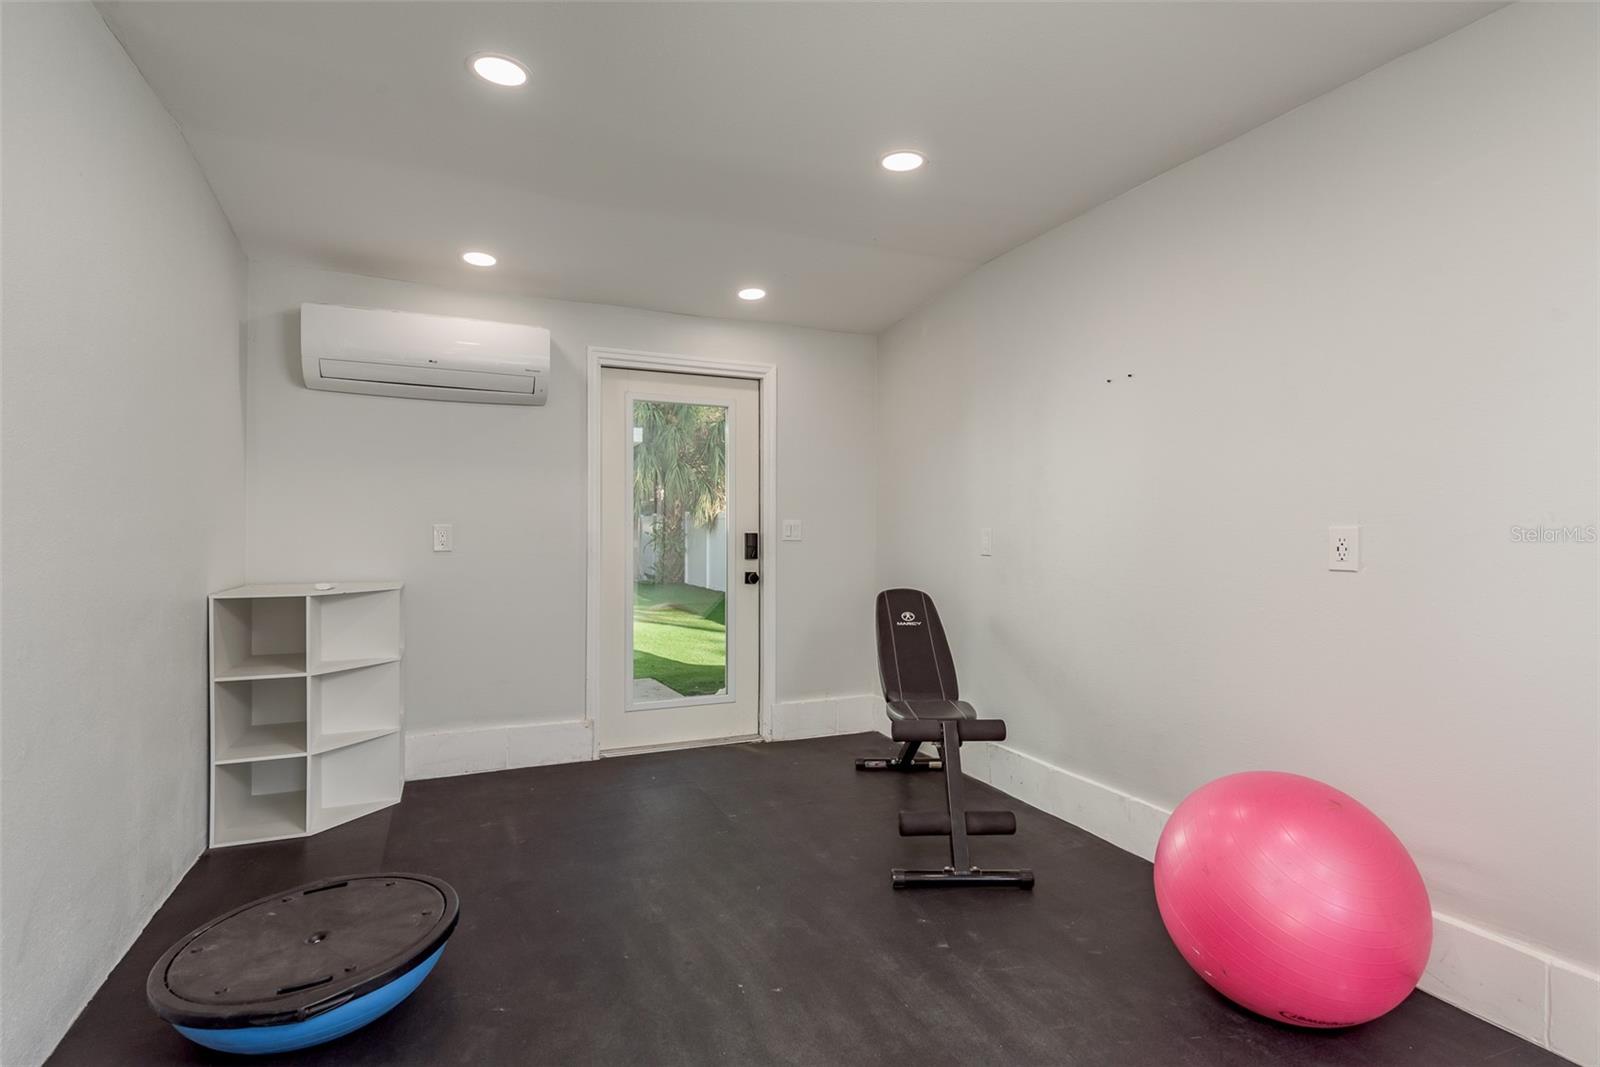 Gym/office /your choice off garage with own AC